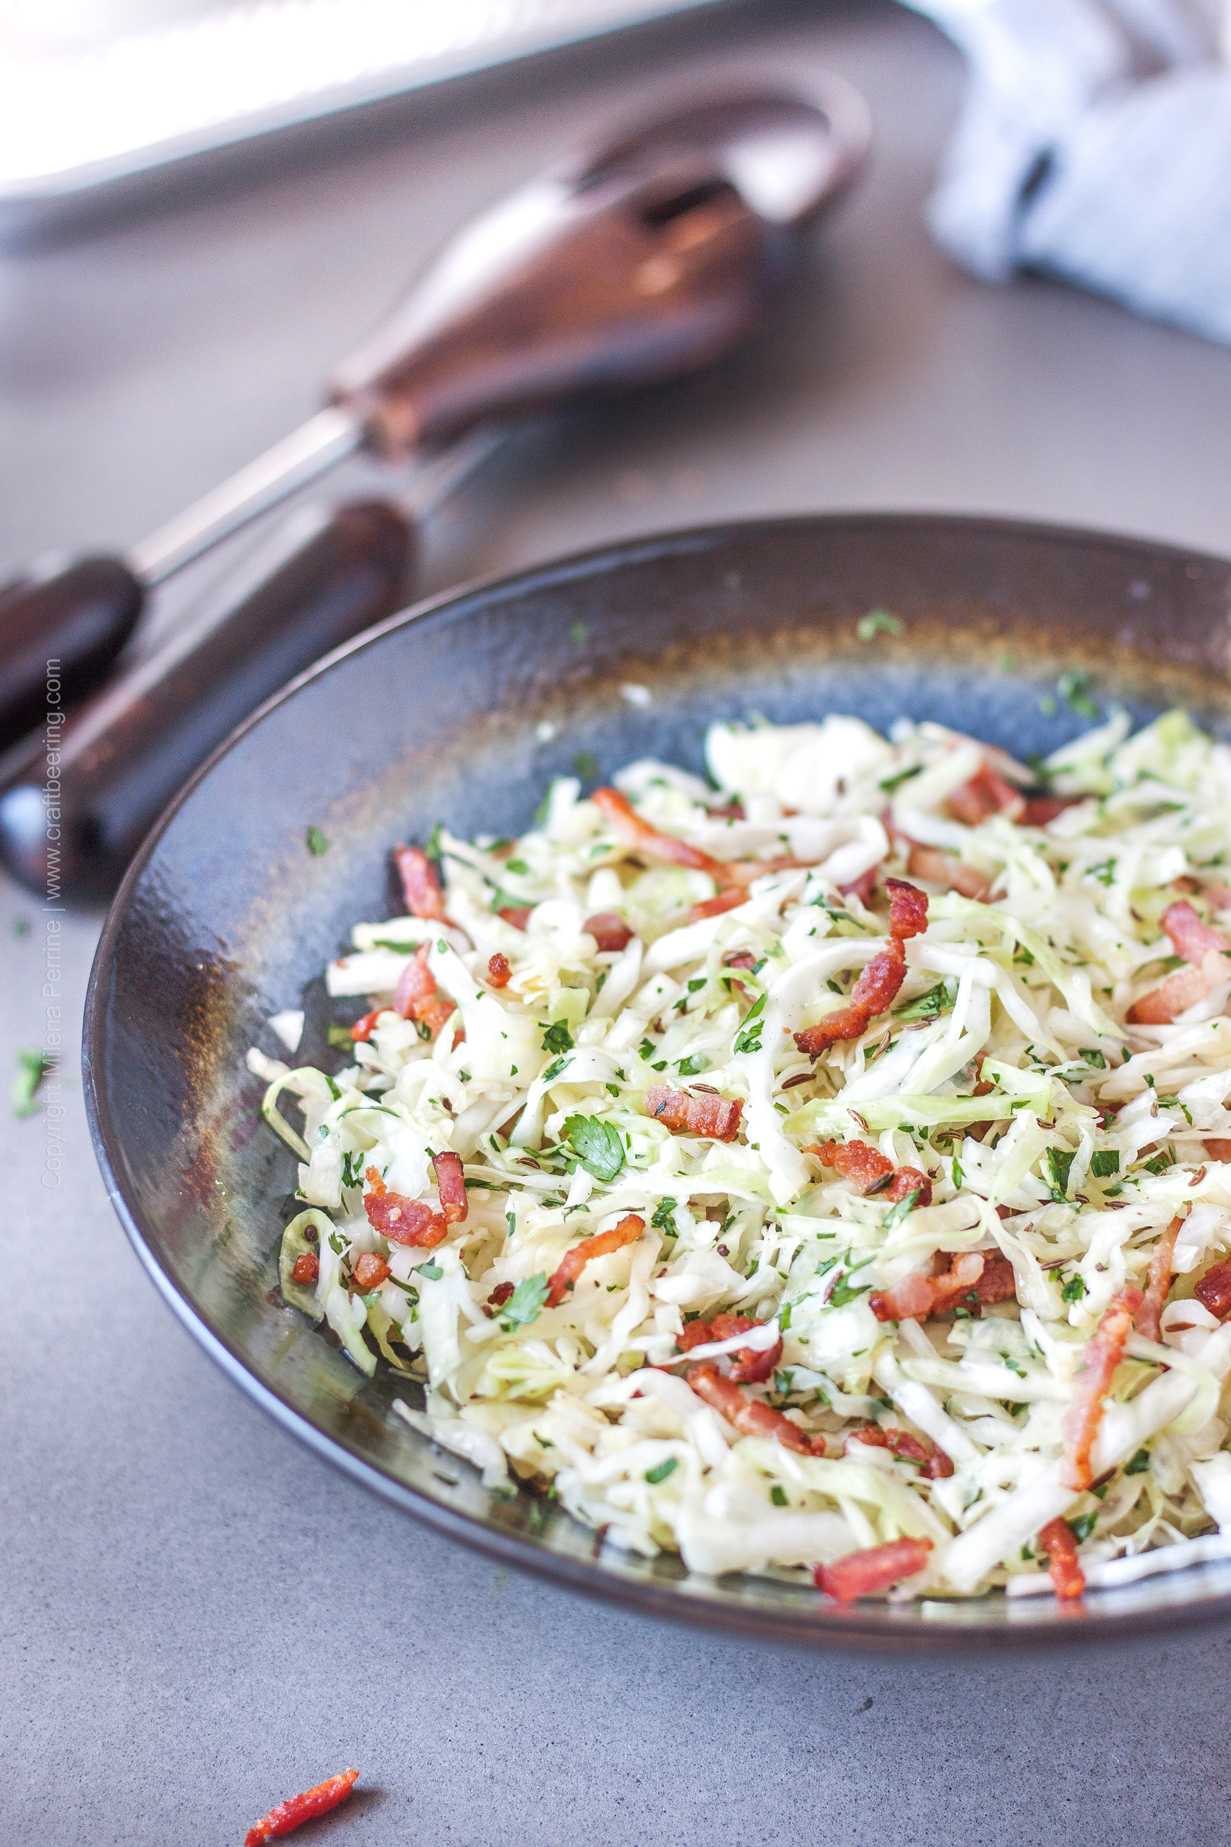 German coleslaw with bacon. Traditional side for roasts, chicken and fish dishes.